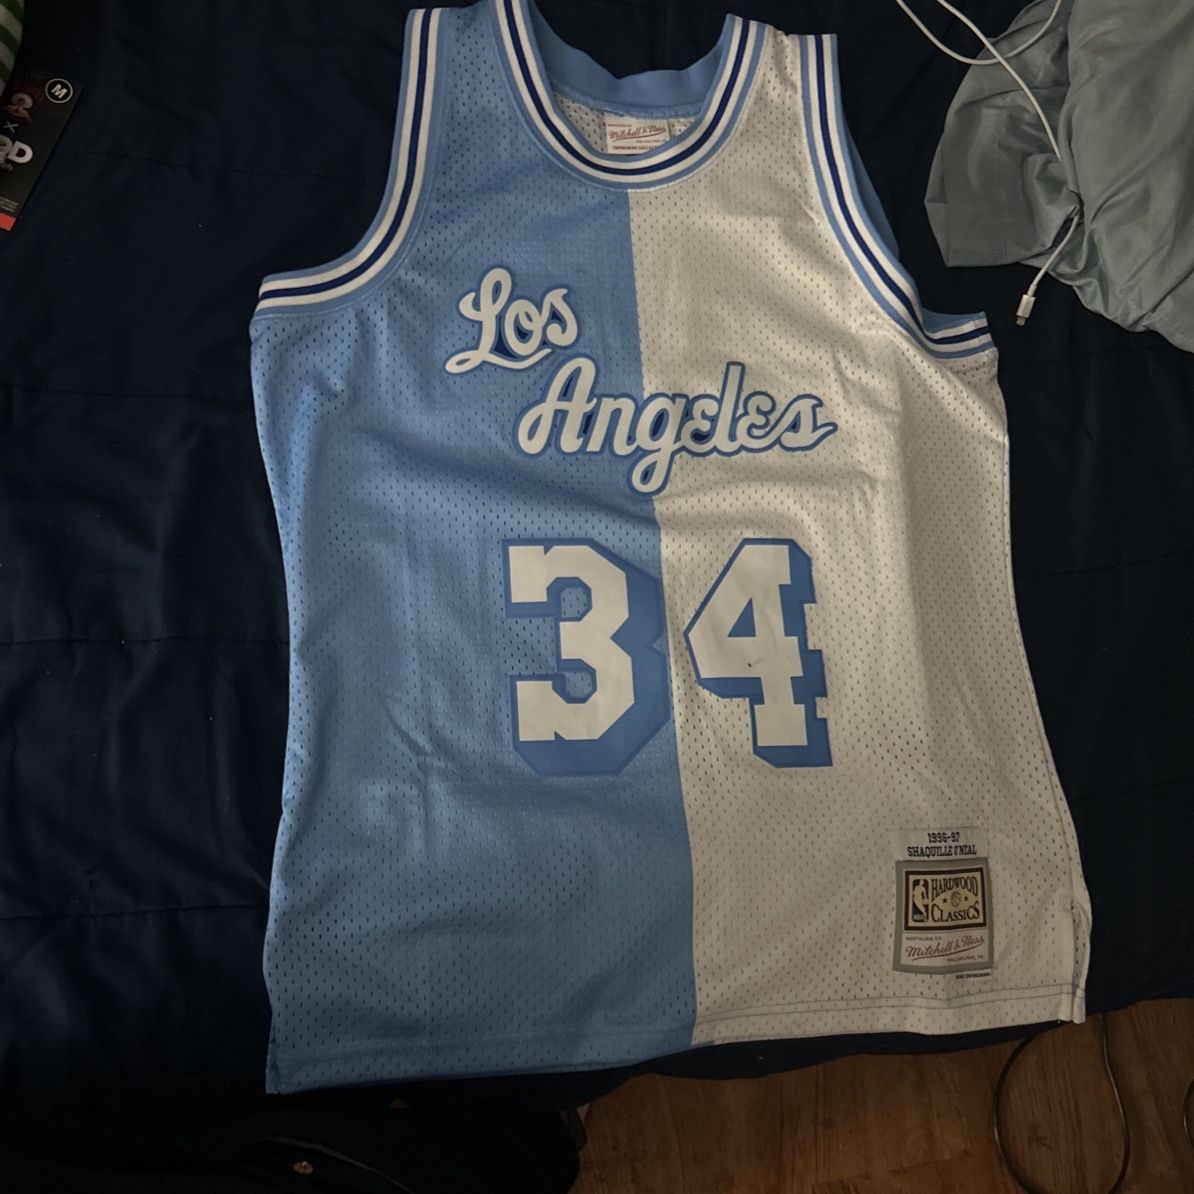 Oneal Jersey Lakers $65